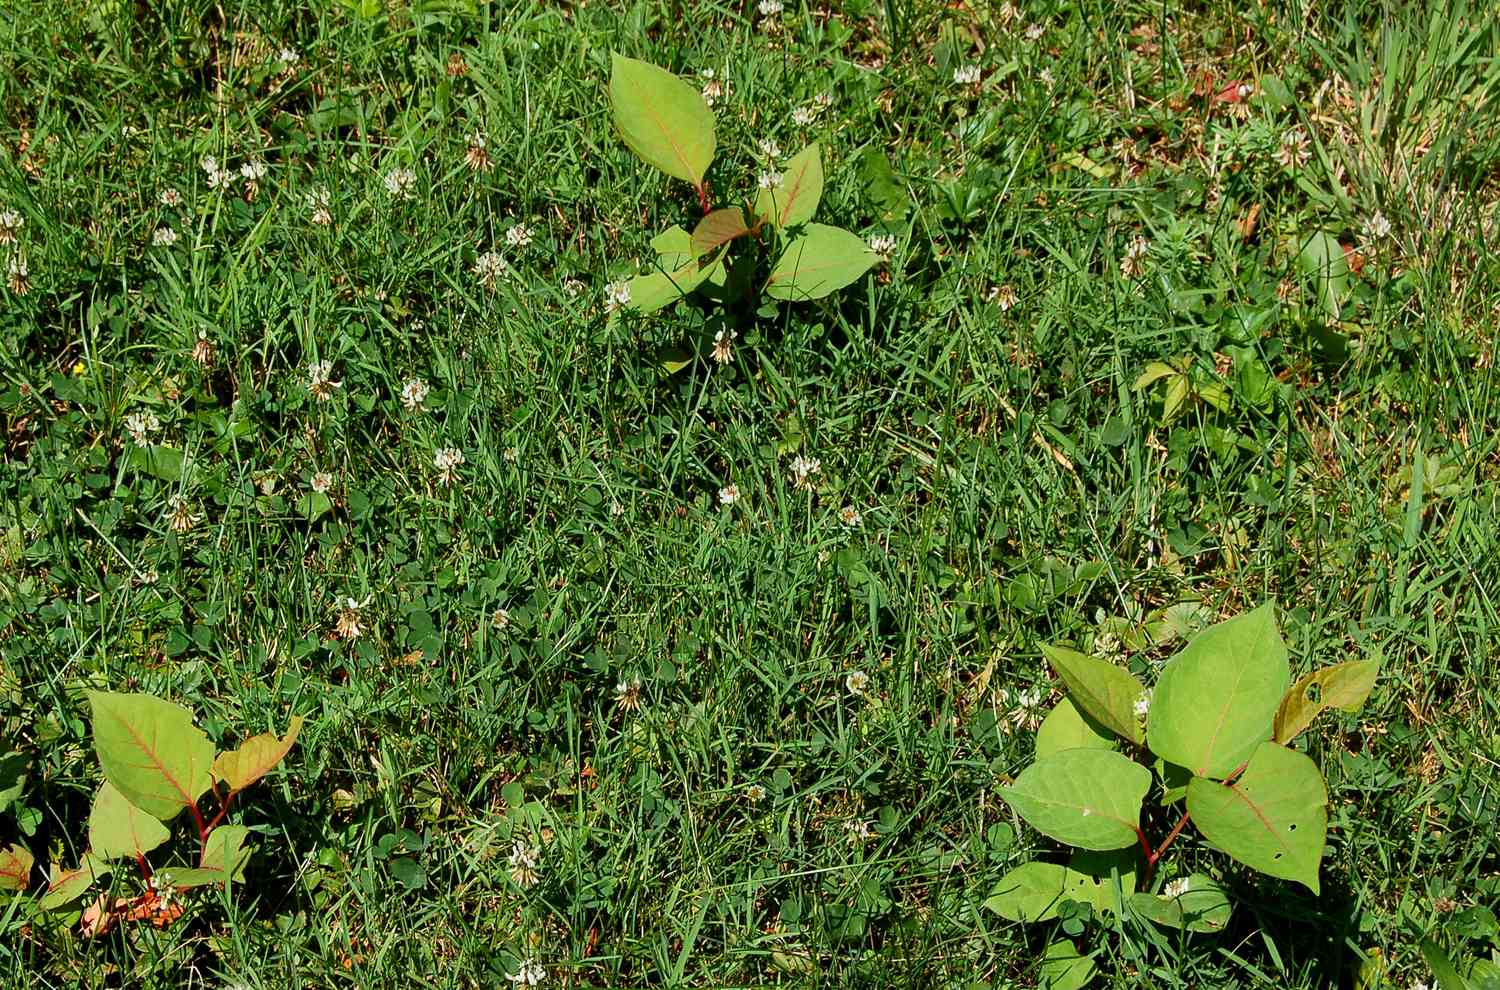 Japanese knotweed shoots popping up in a lawn.